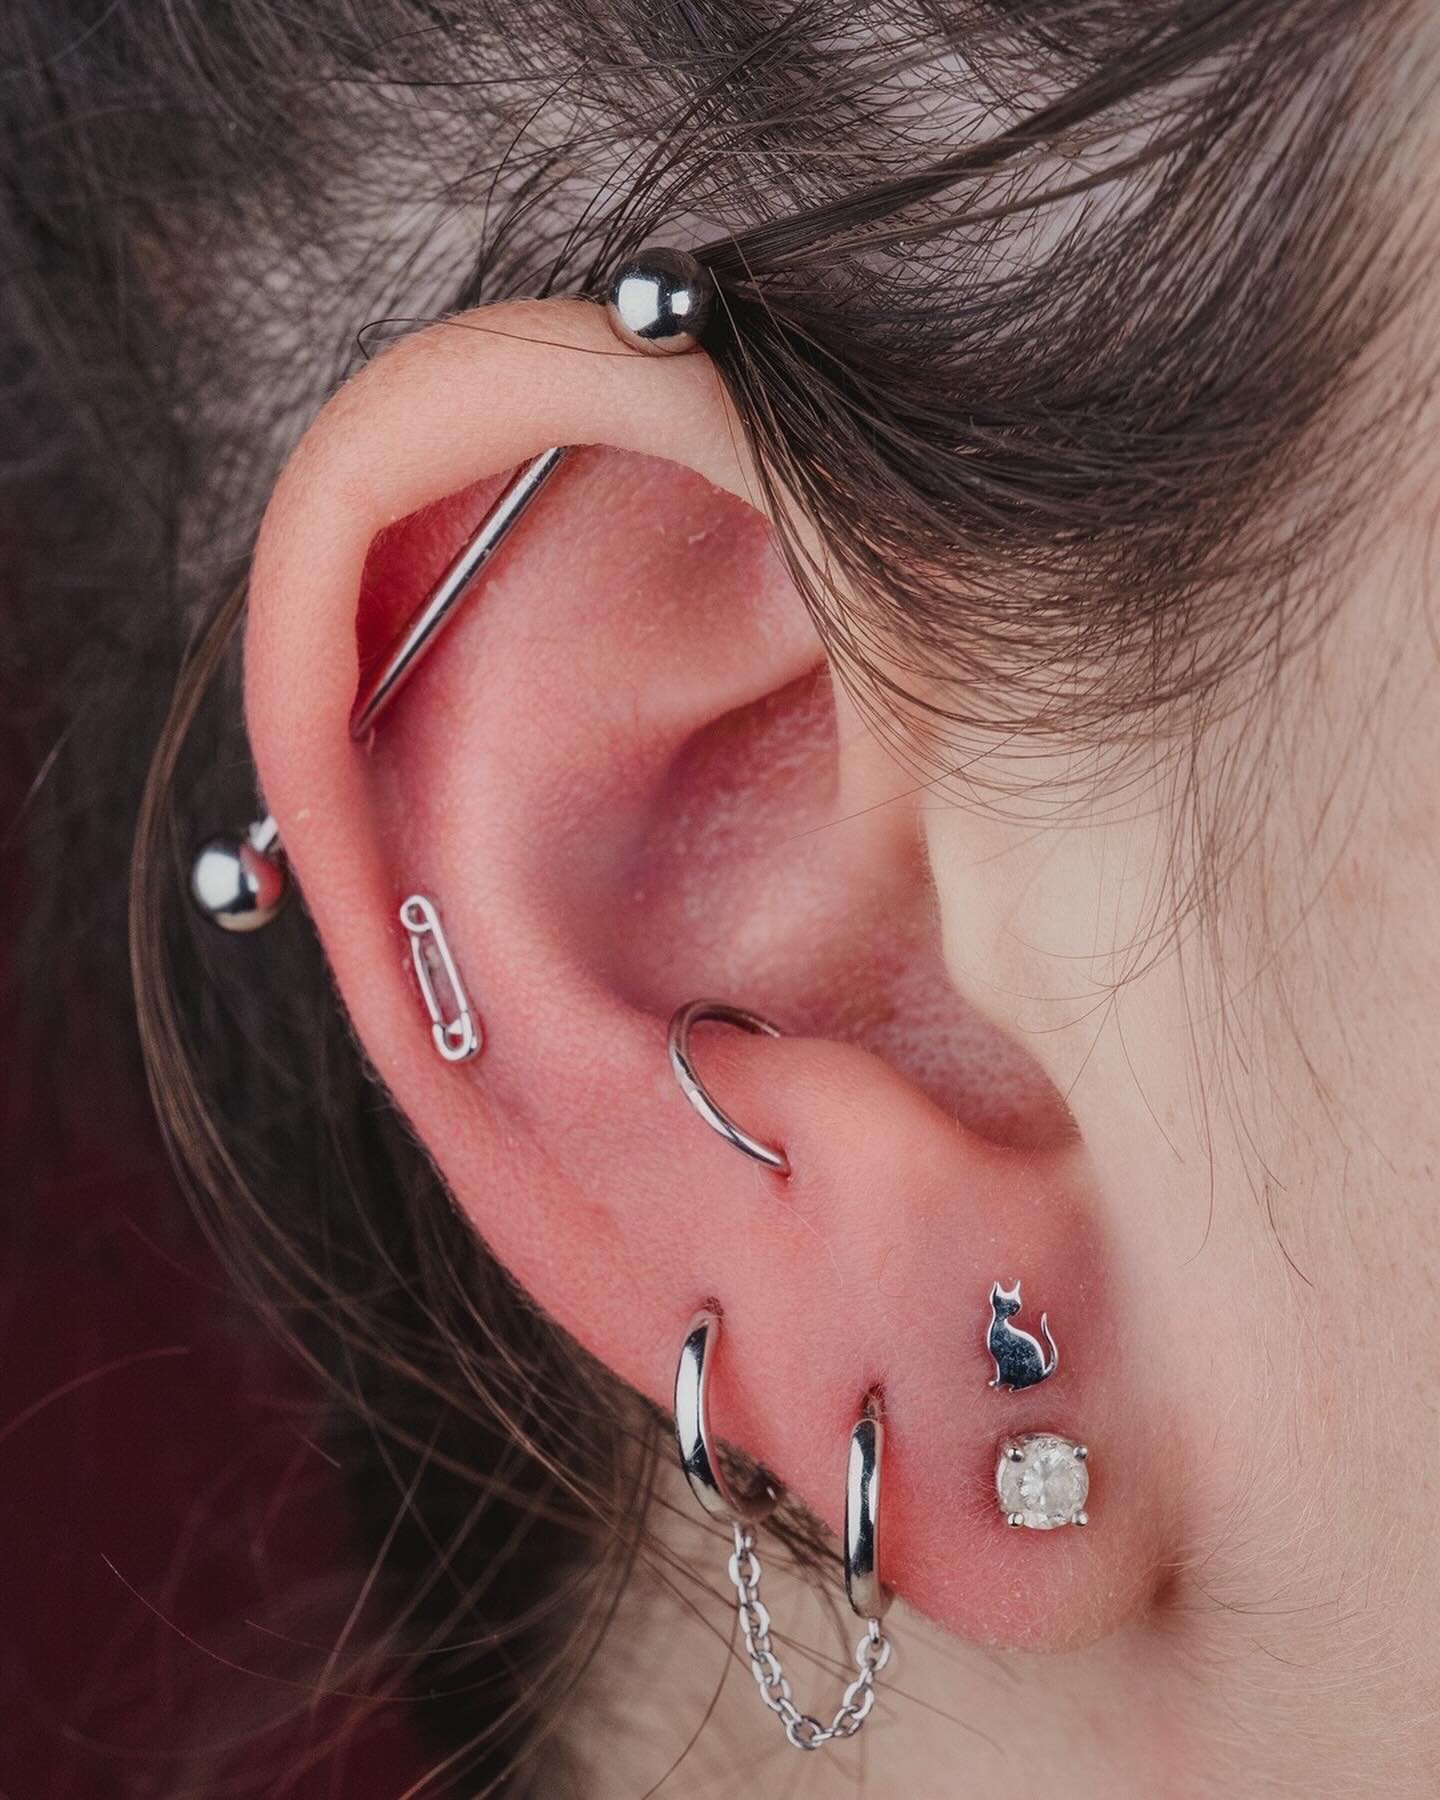 I LOOK🪞
 
IN THE MIRROR
 
Halen has such a cool collection of white gold and steel jewelry, and we got to add to it with a Juni-Purr end to make for an adorable pair of matching stacked lobes, as well as a Serpent end in the conch! Both piercings pe